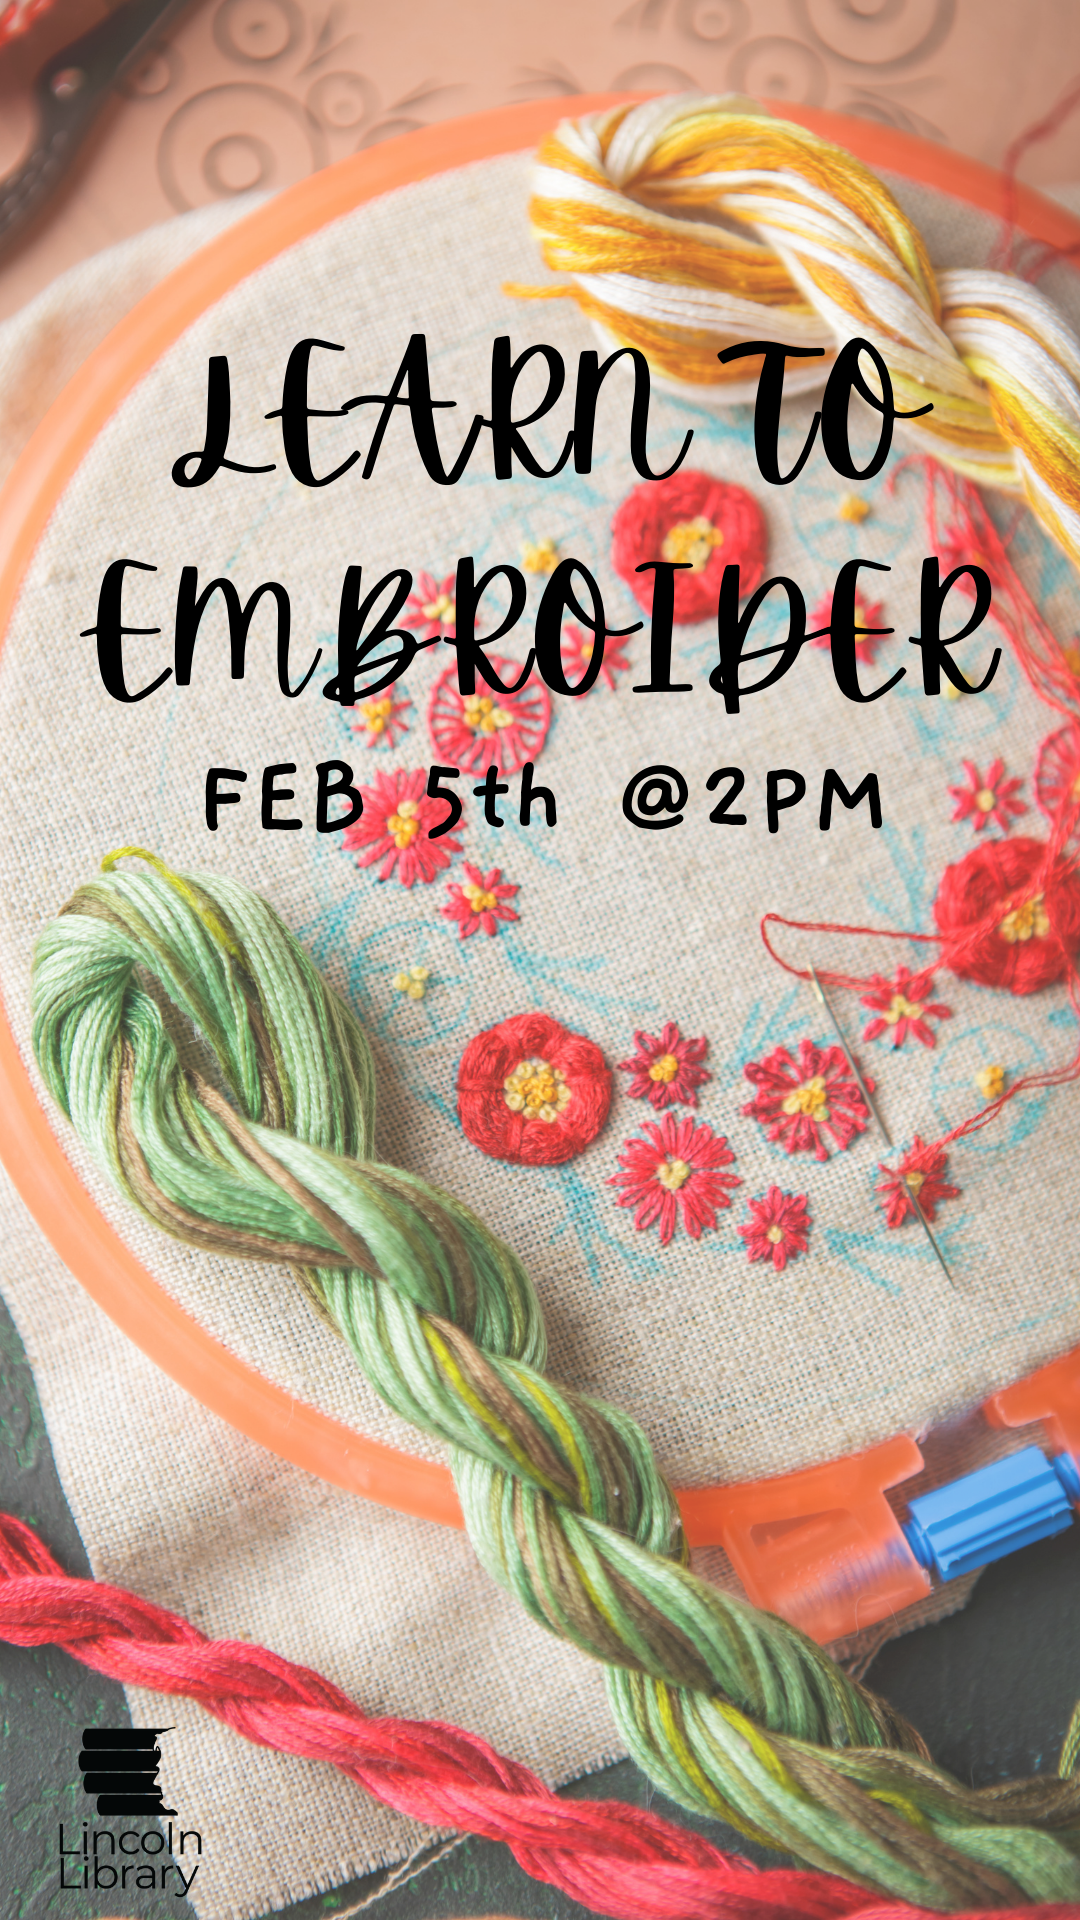 learn to embroider flyer